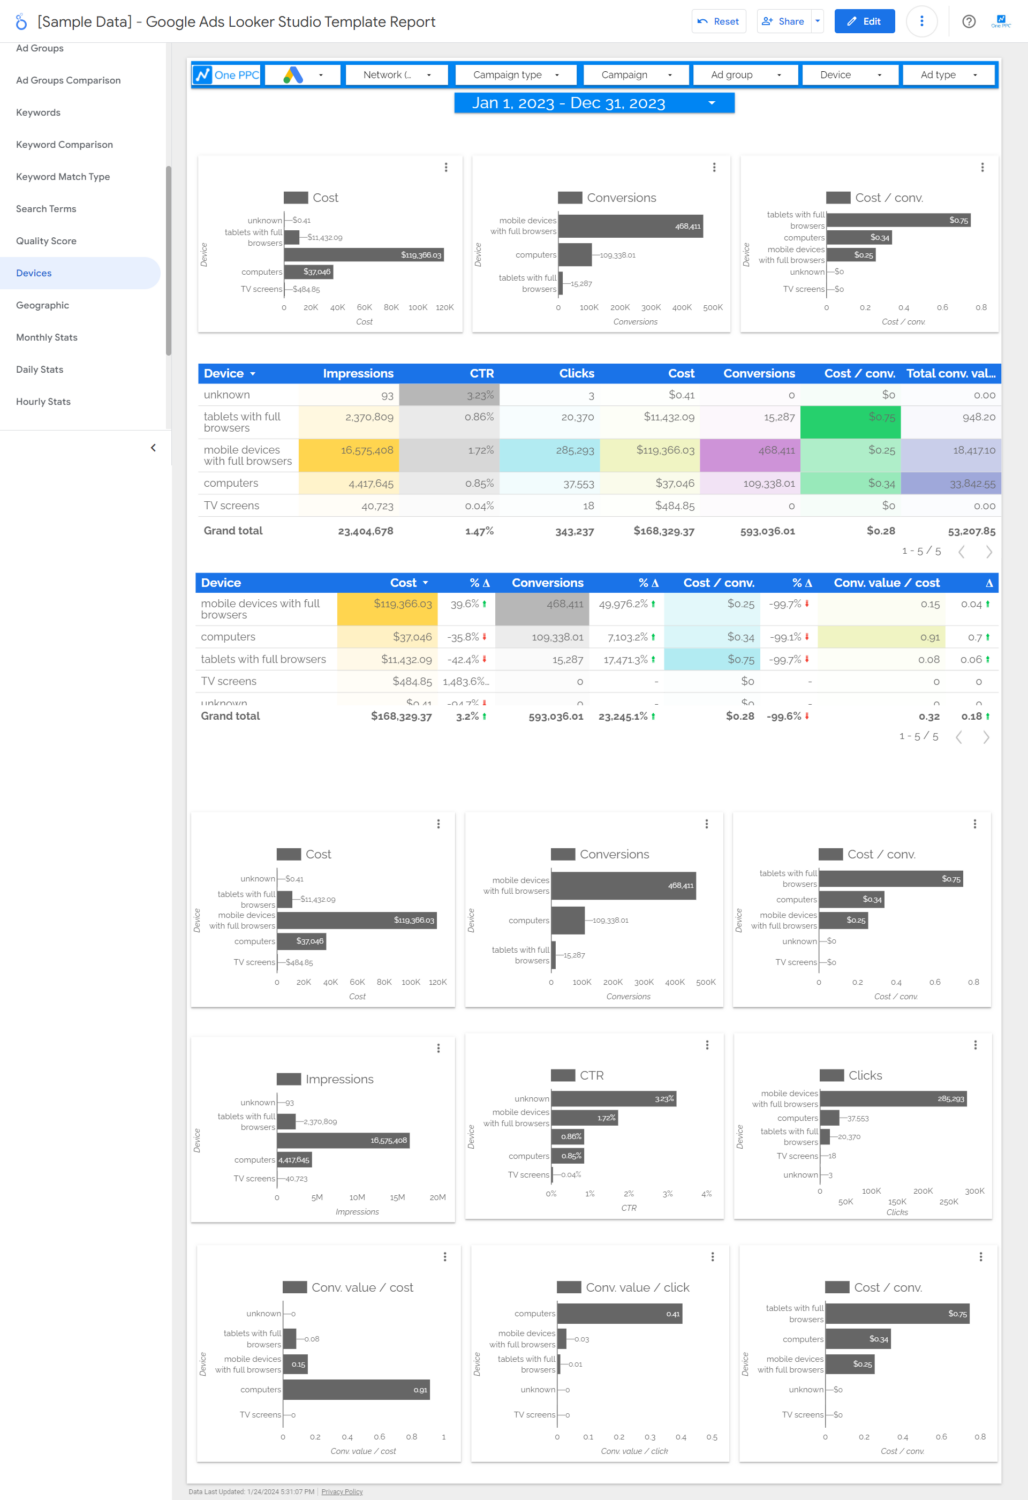 Google Ads Looker Studio Template Report - 9.1 Devices